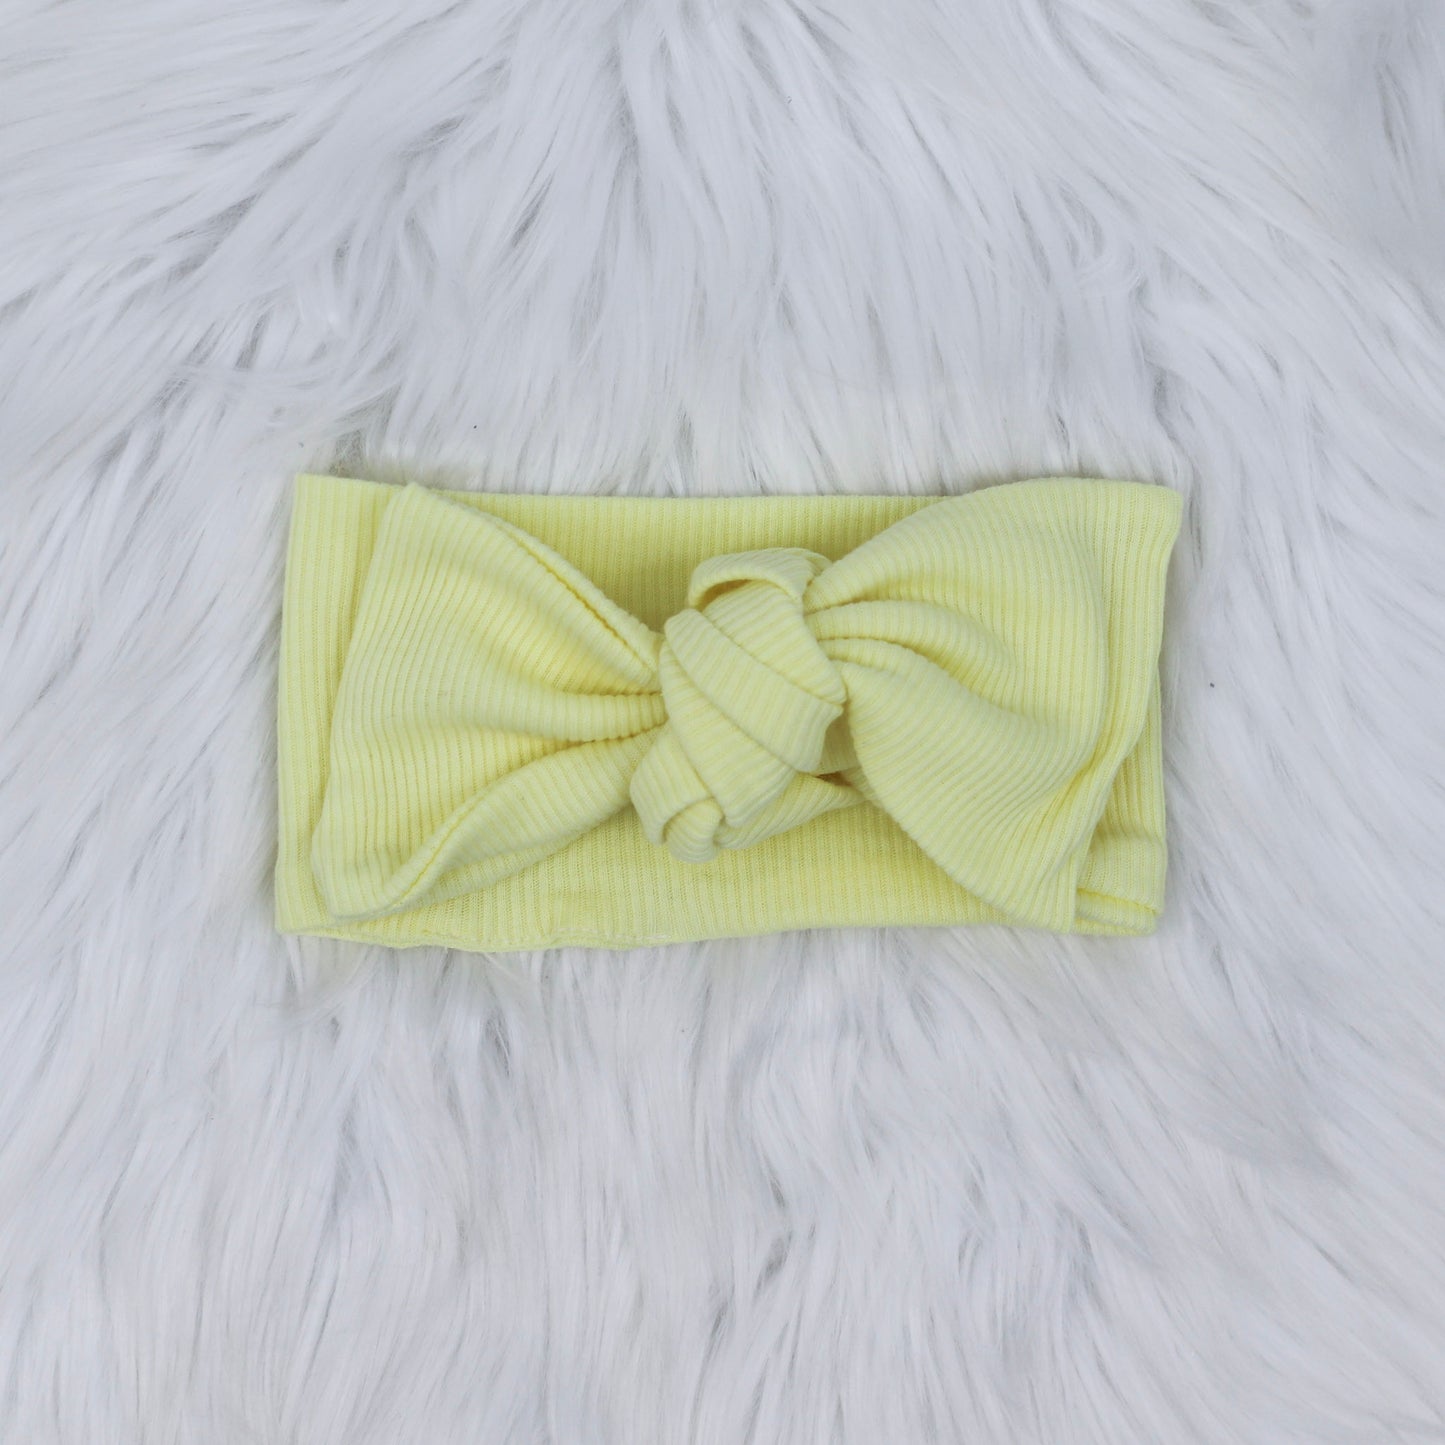 Lemon Ribbed Lounge Headwrap (Made to Order)